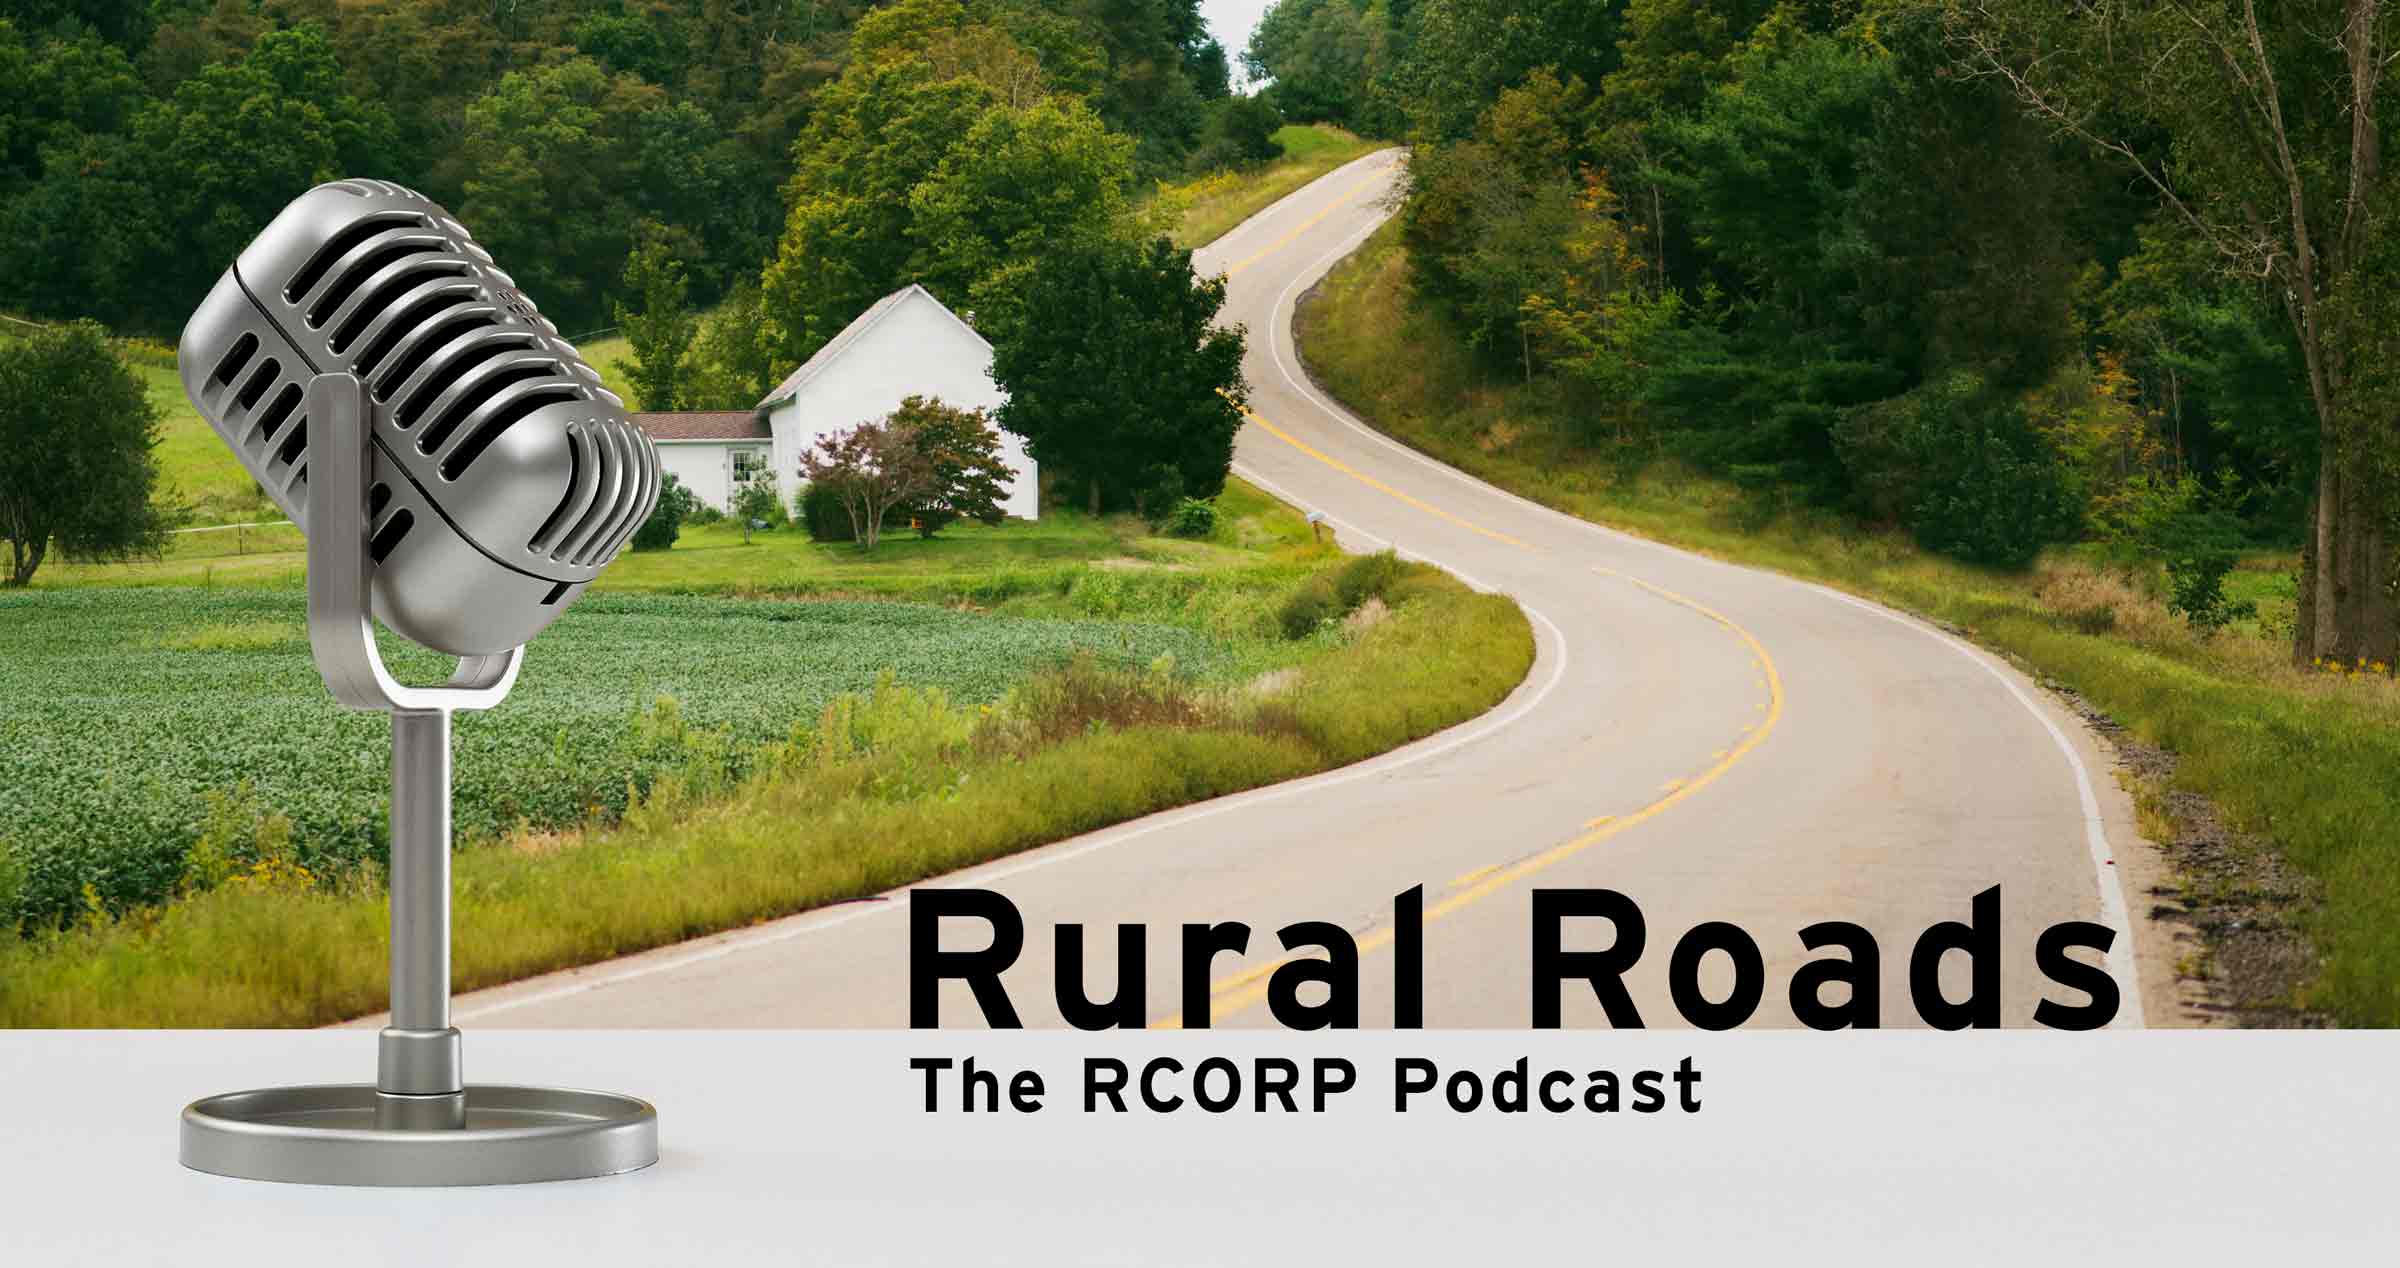 Rural Roads - The RCORP Podcast